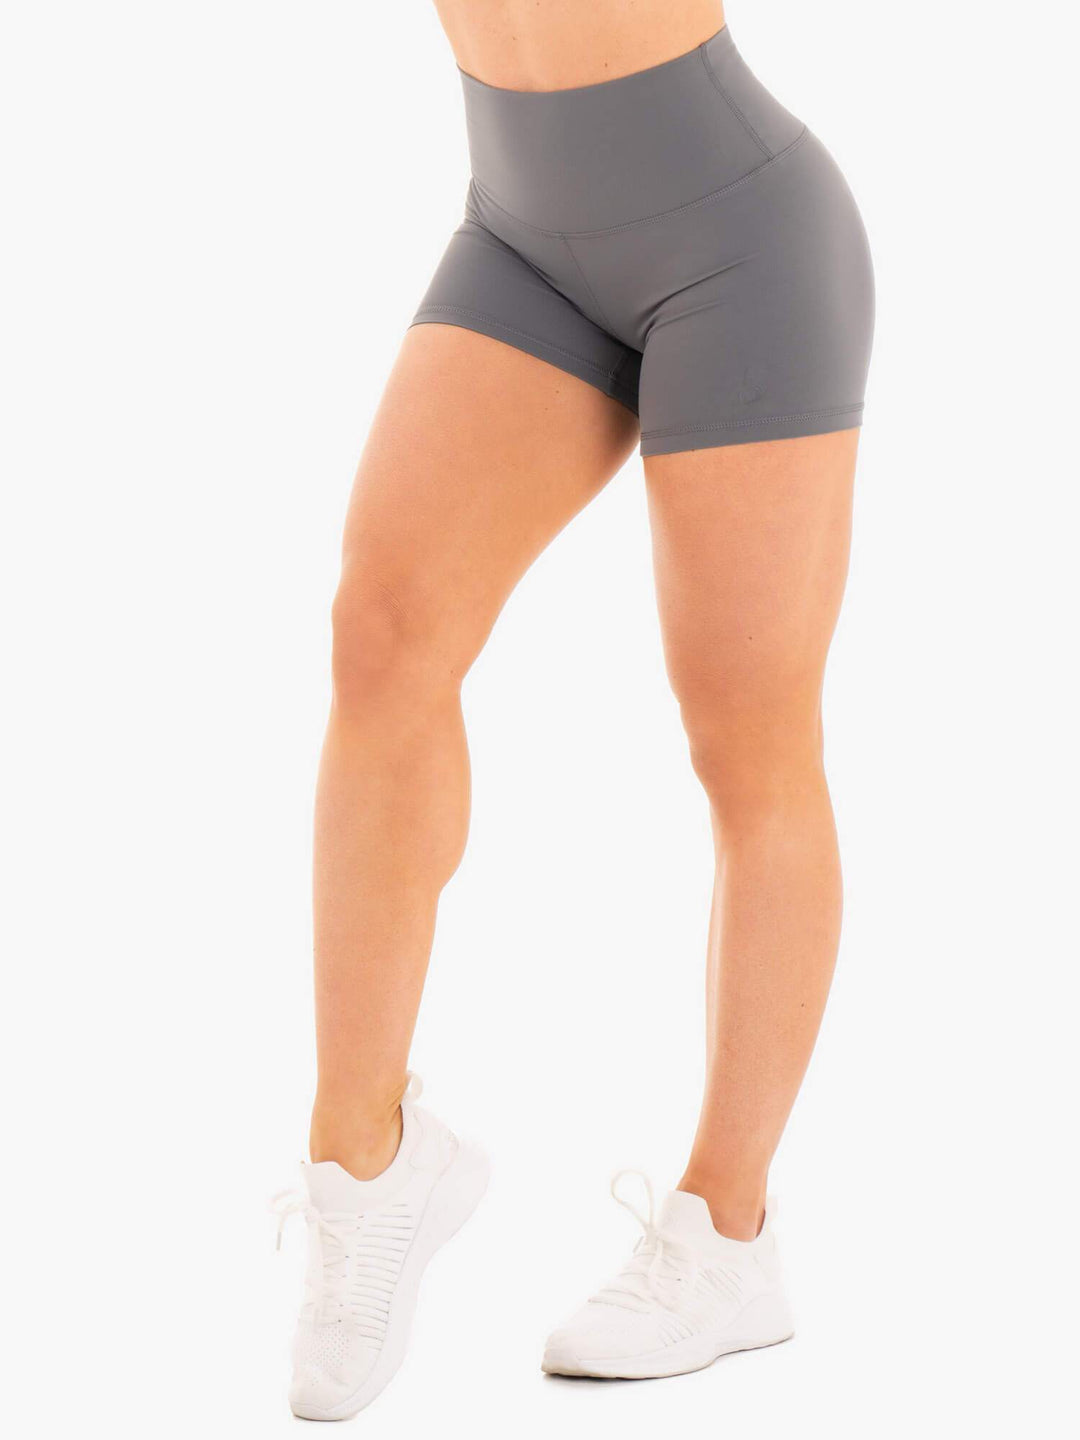 NKD High Waisted Shorts - Charcoal Clothing Ryderwear 